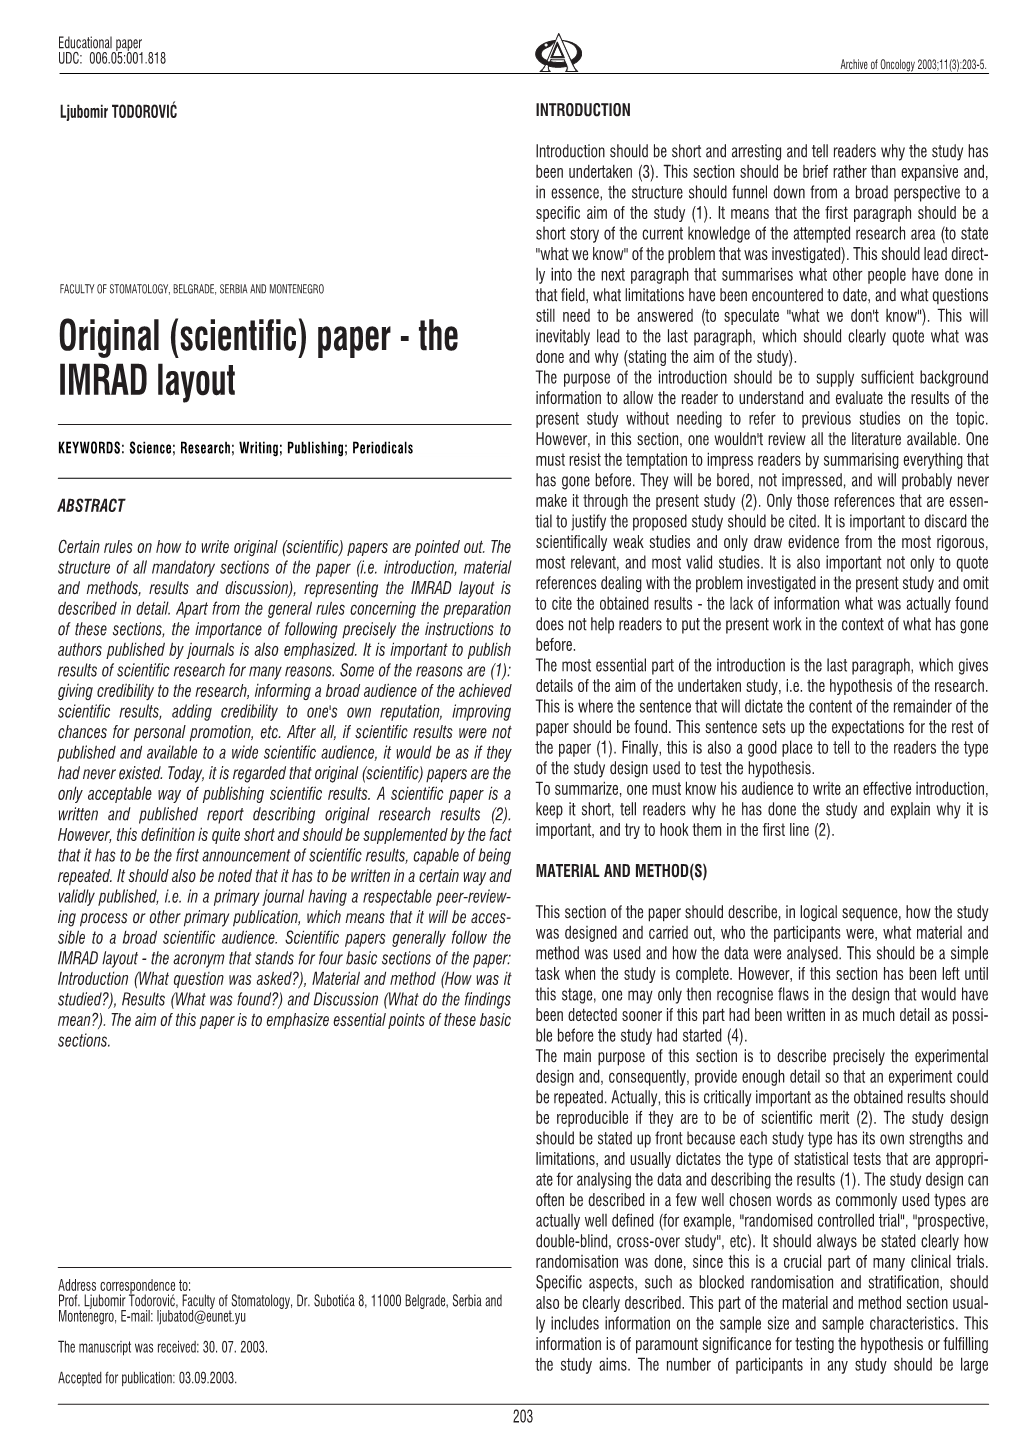 Original (Scientific) Paper - the Done and Why (Stating the Aim of the Study)